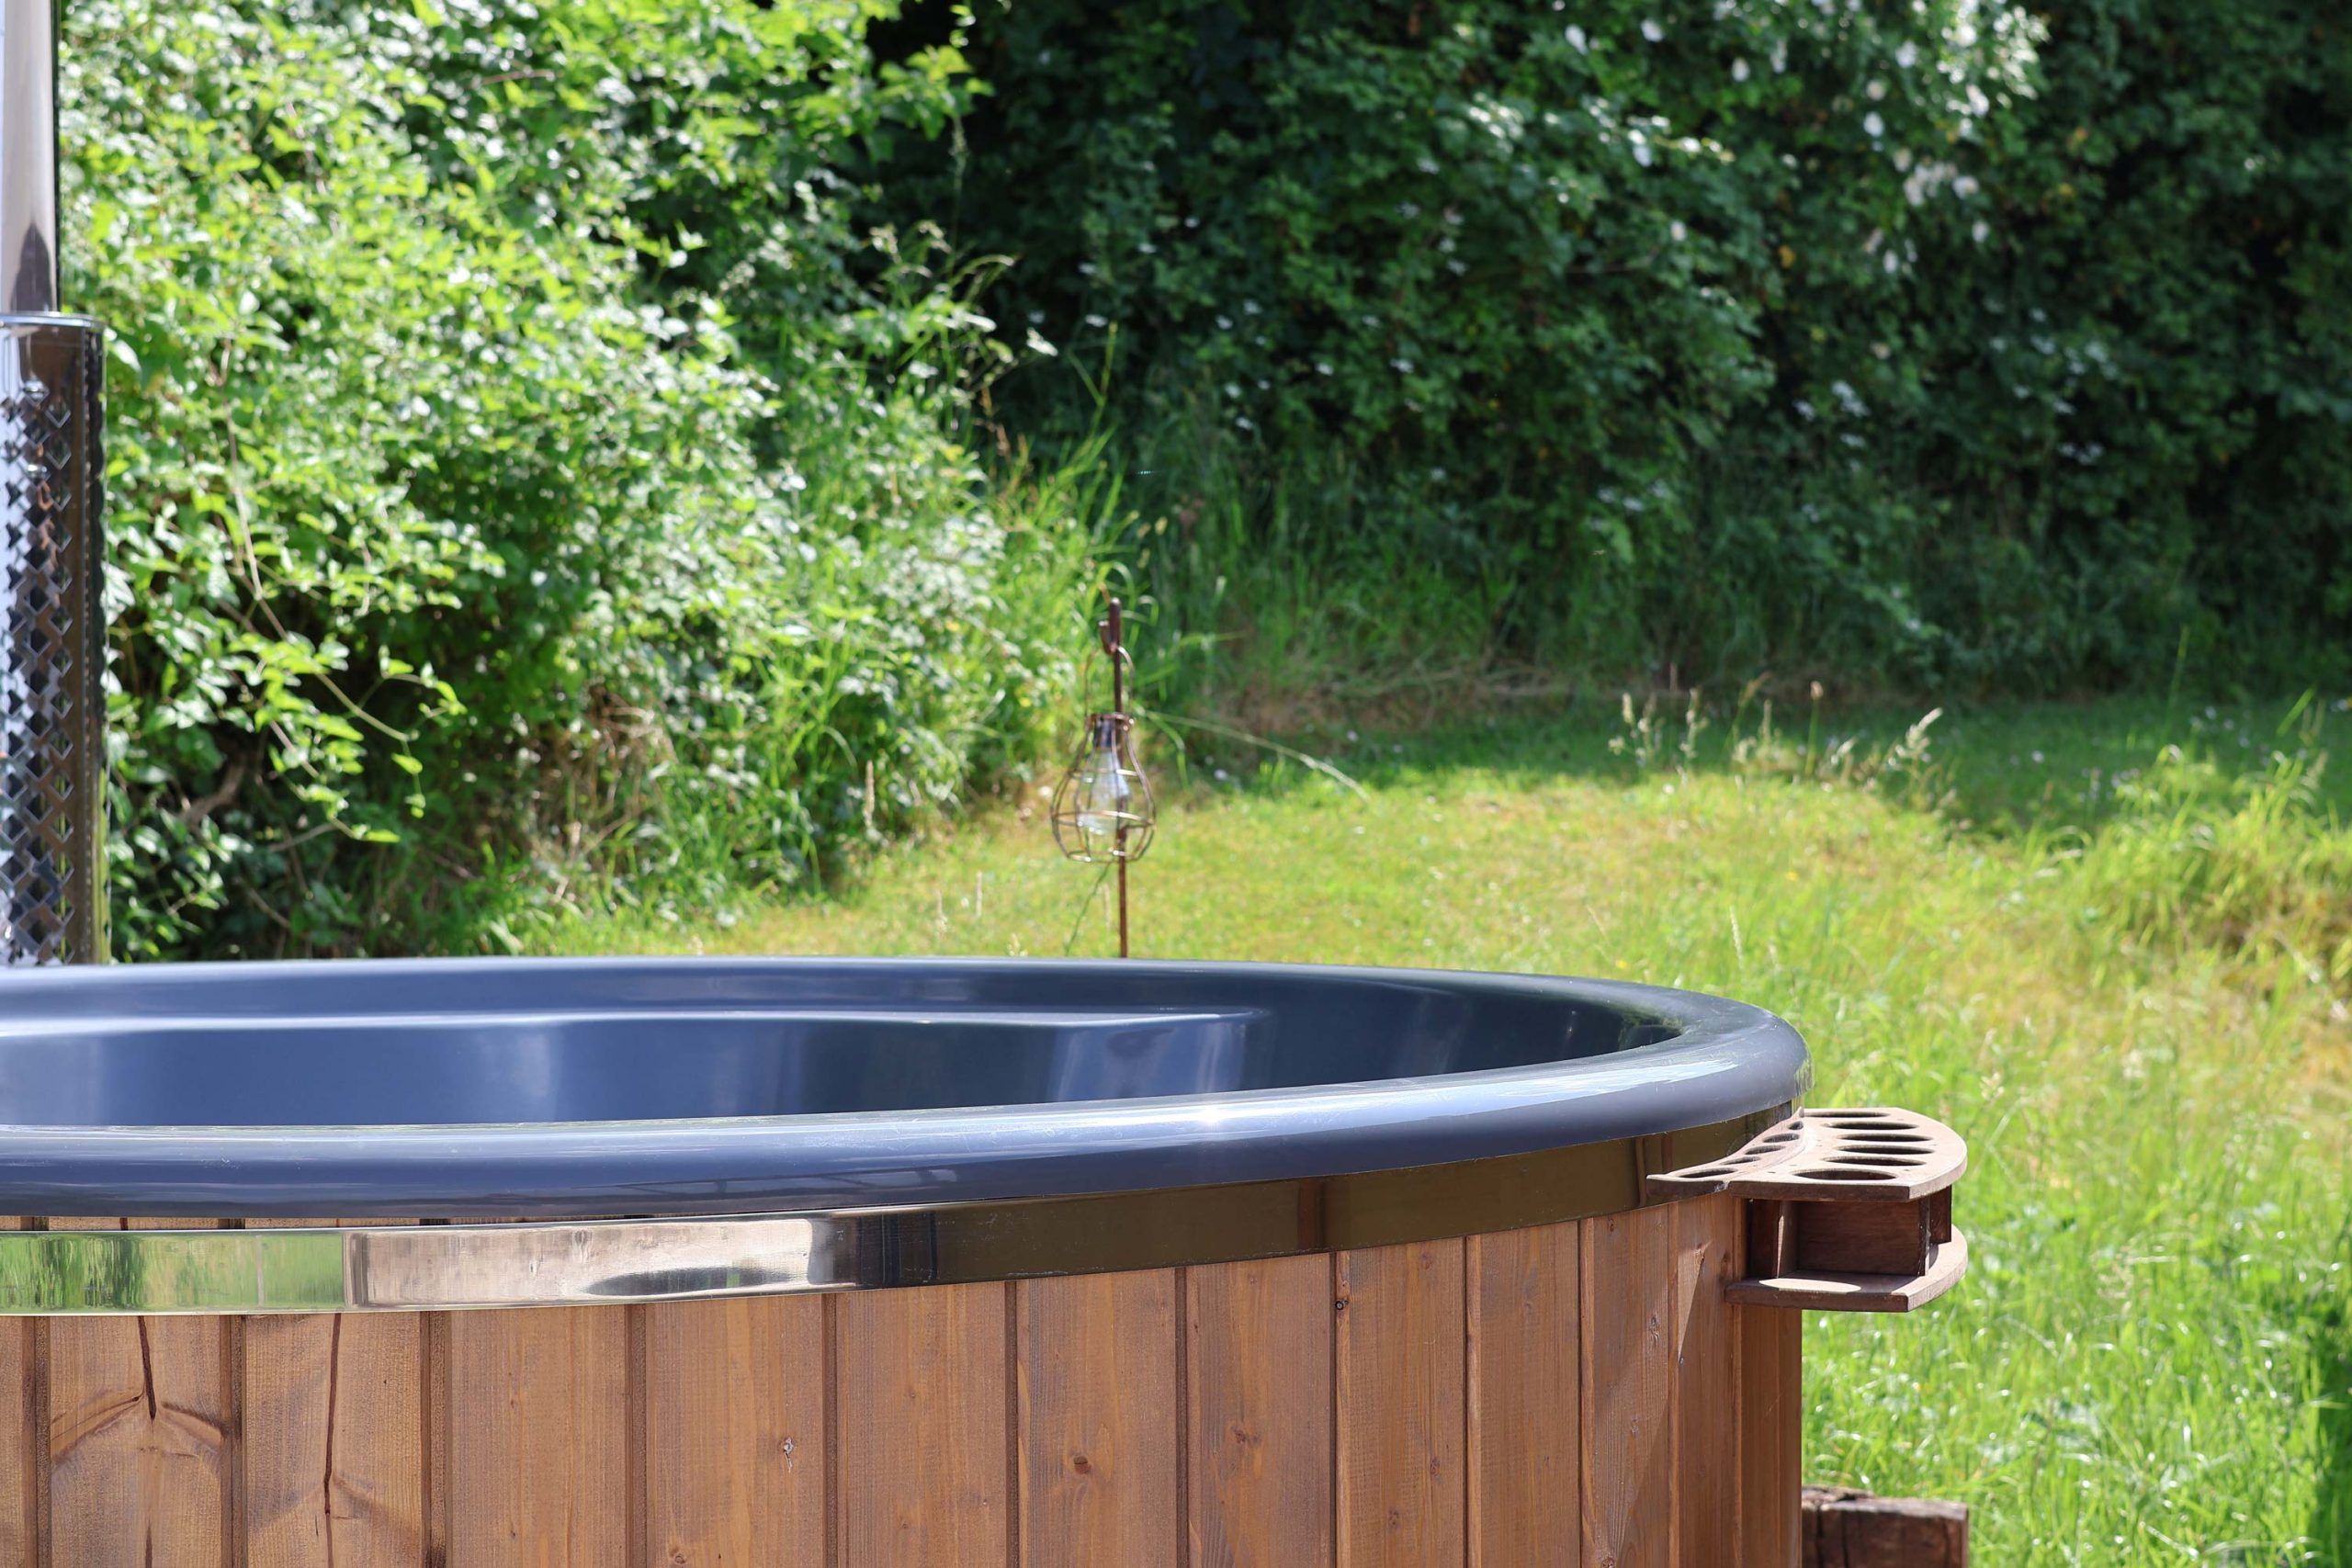 Eco hot tub at Loose Reins in Dorset